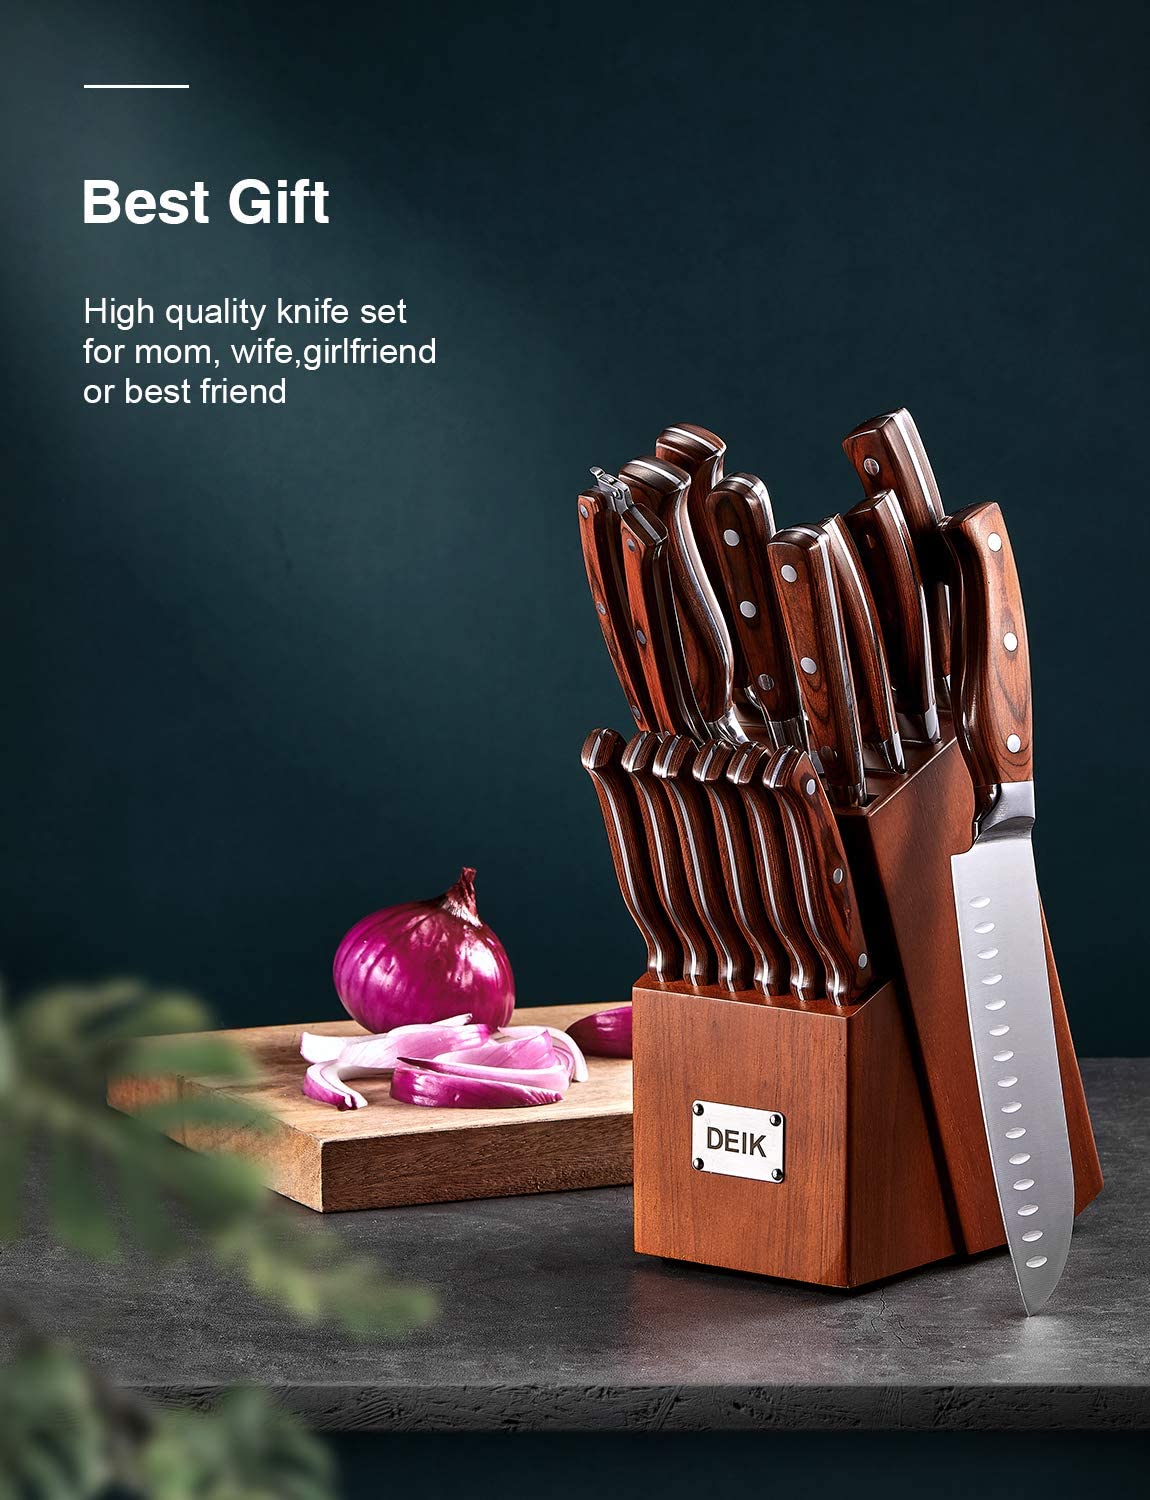 Deik | Knife Set, High Carbon Stainless Steel Kitchen Knife Set 16PCS, Super Sharp Cutlery Knife with Carving Fork and Serrated Steak Knives, Best Gift